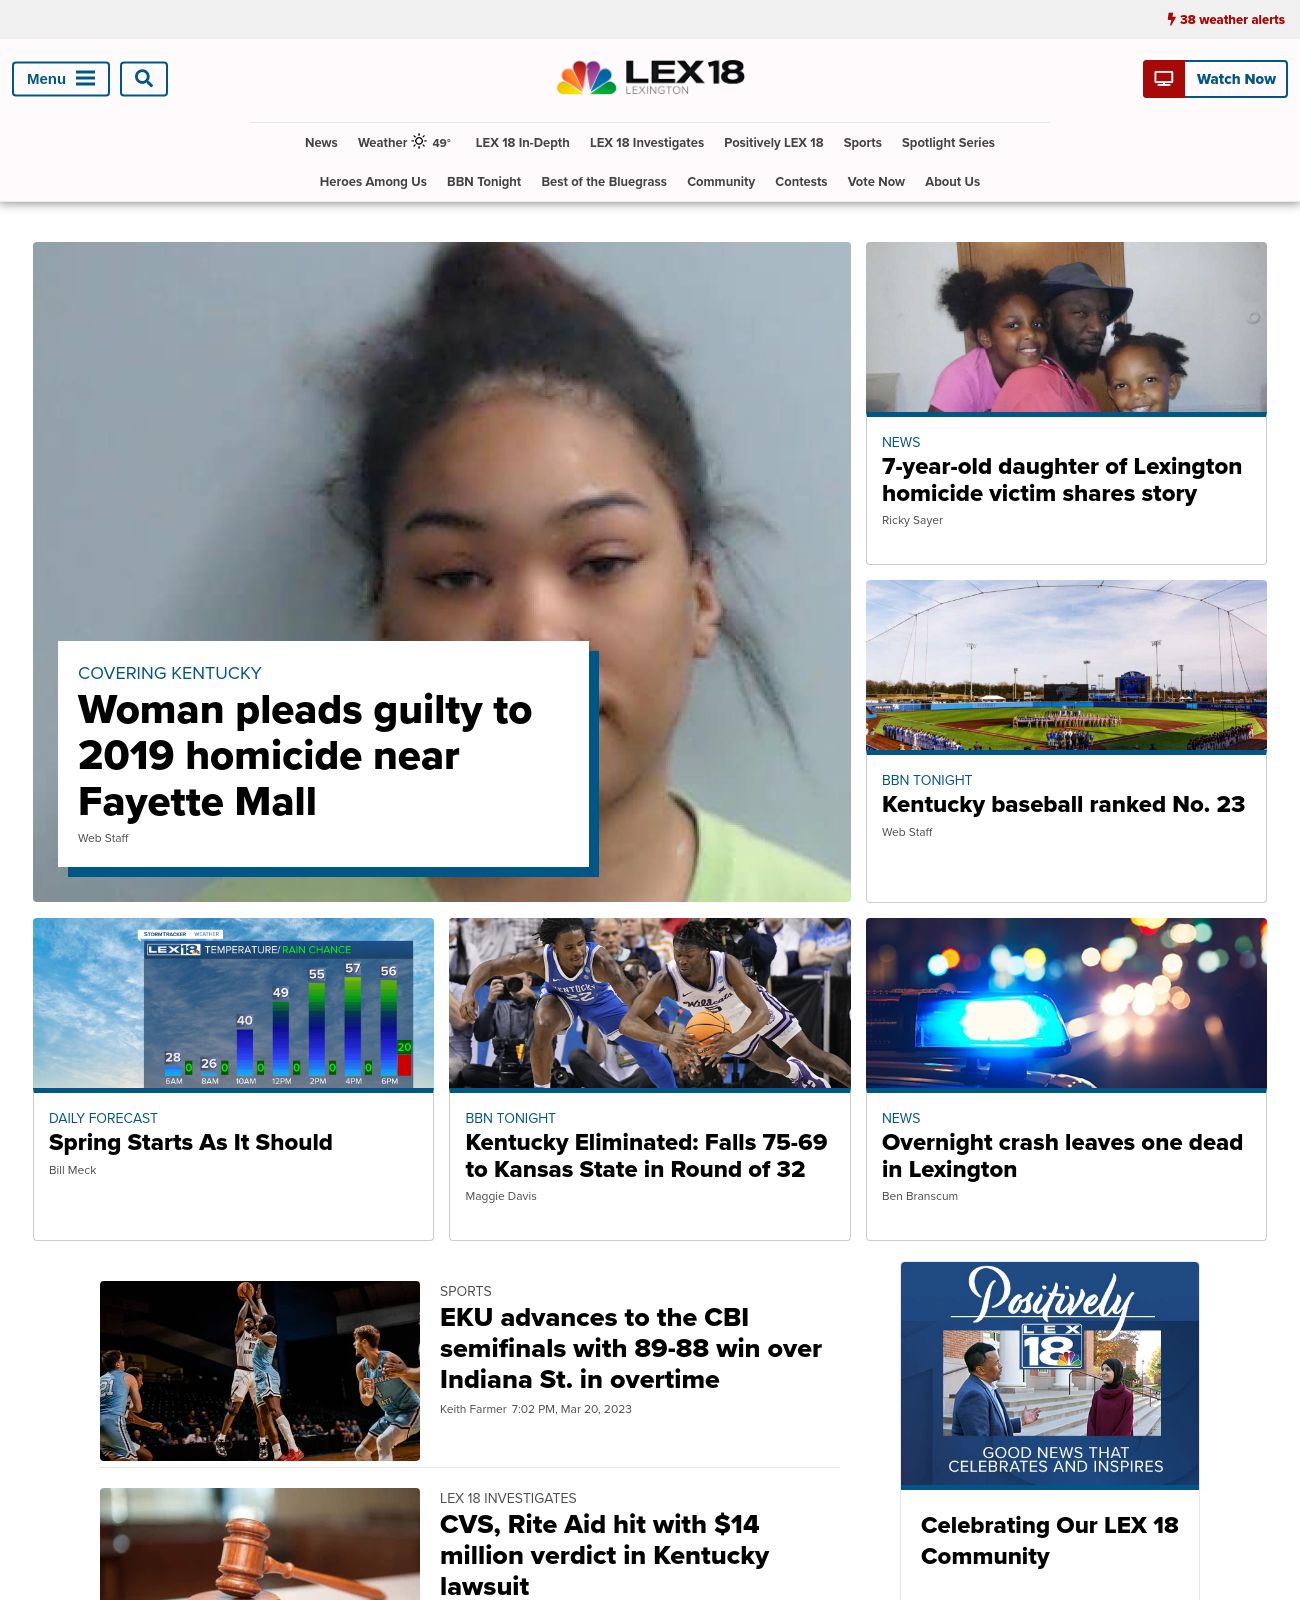 LEX 18 News at 2023-03-20 19:26:16-04:00 local time